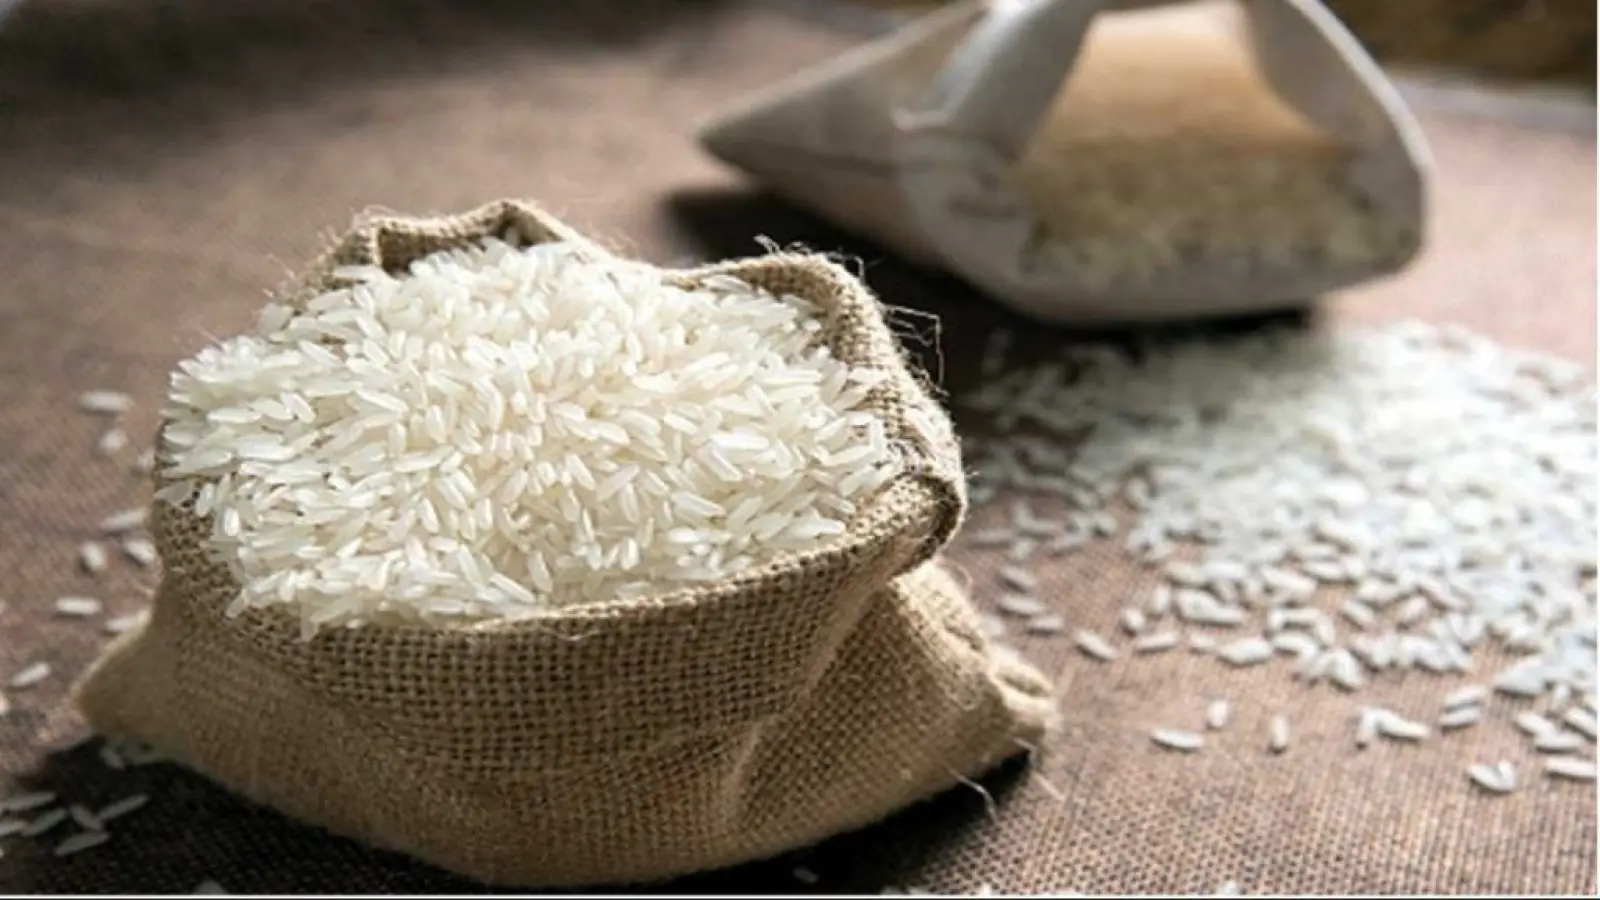 Bharat Rice: After flour, government will now sell cheaper rice under Bharat brand, announcement will be made soon